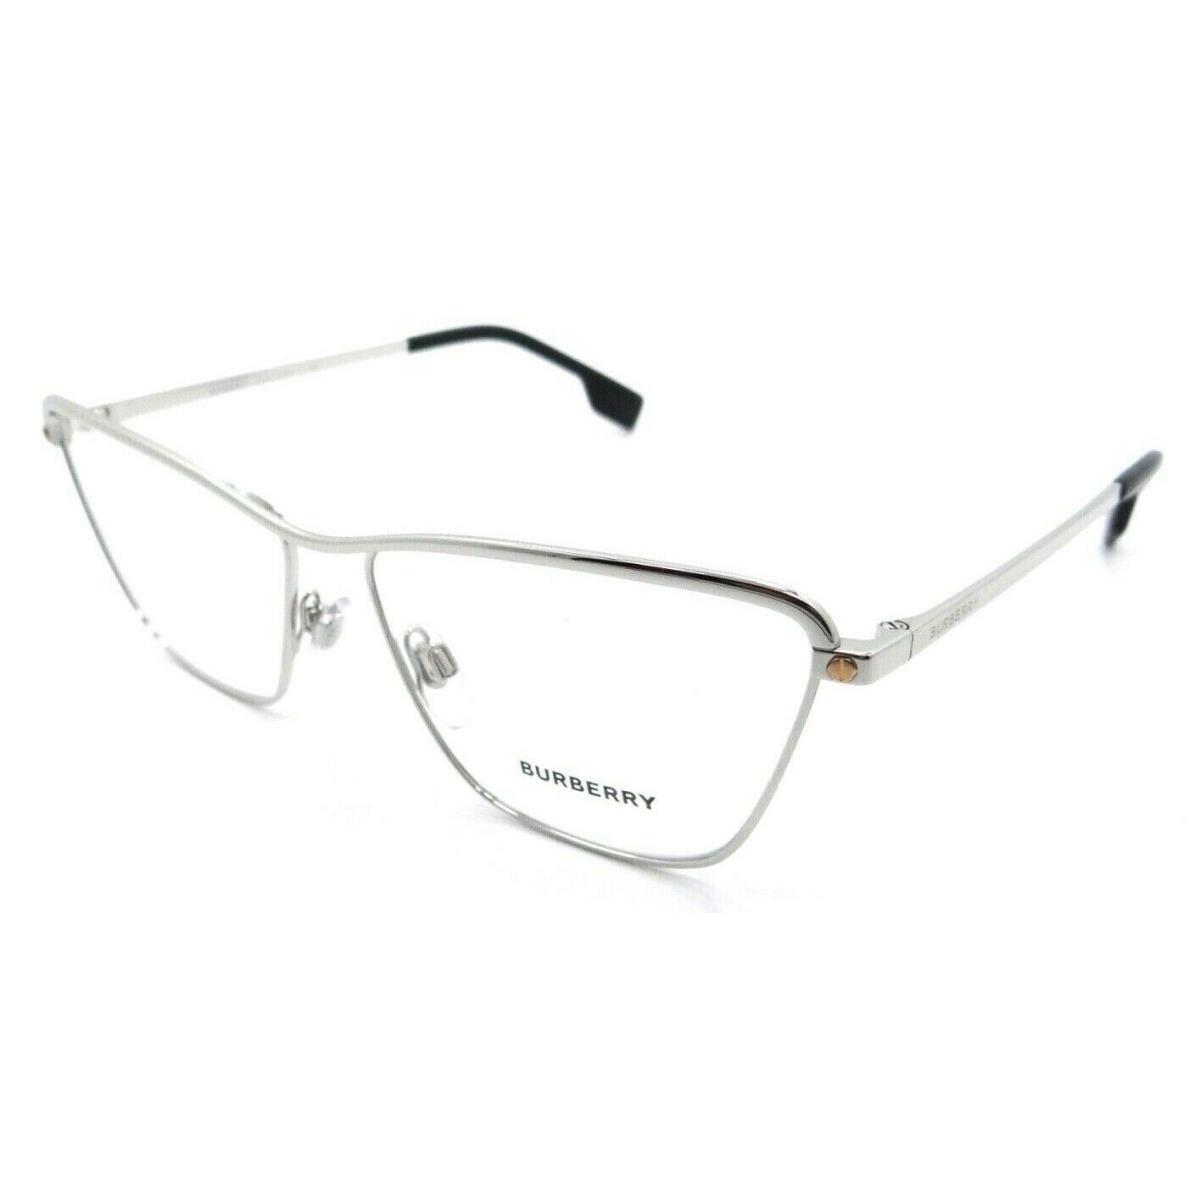 Burberry Eyeglasses Frames BE 1343 1303 57-14-140 Silver Made in Italy